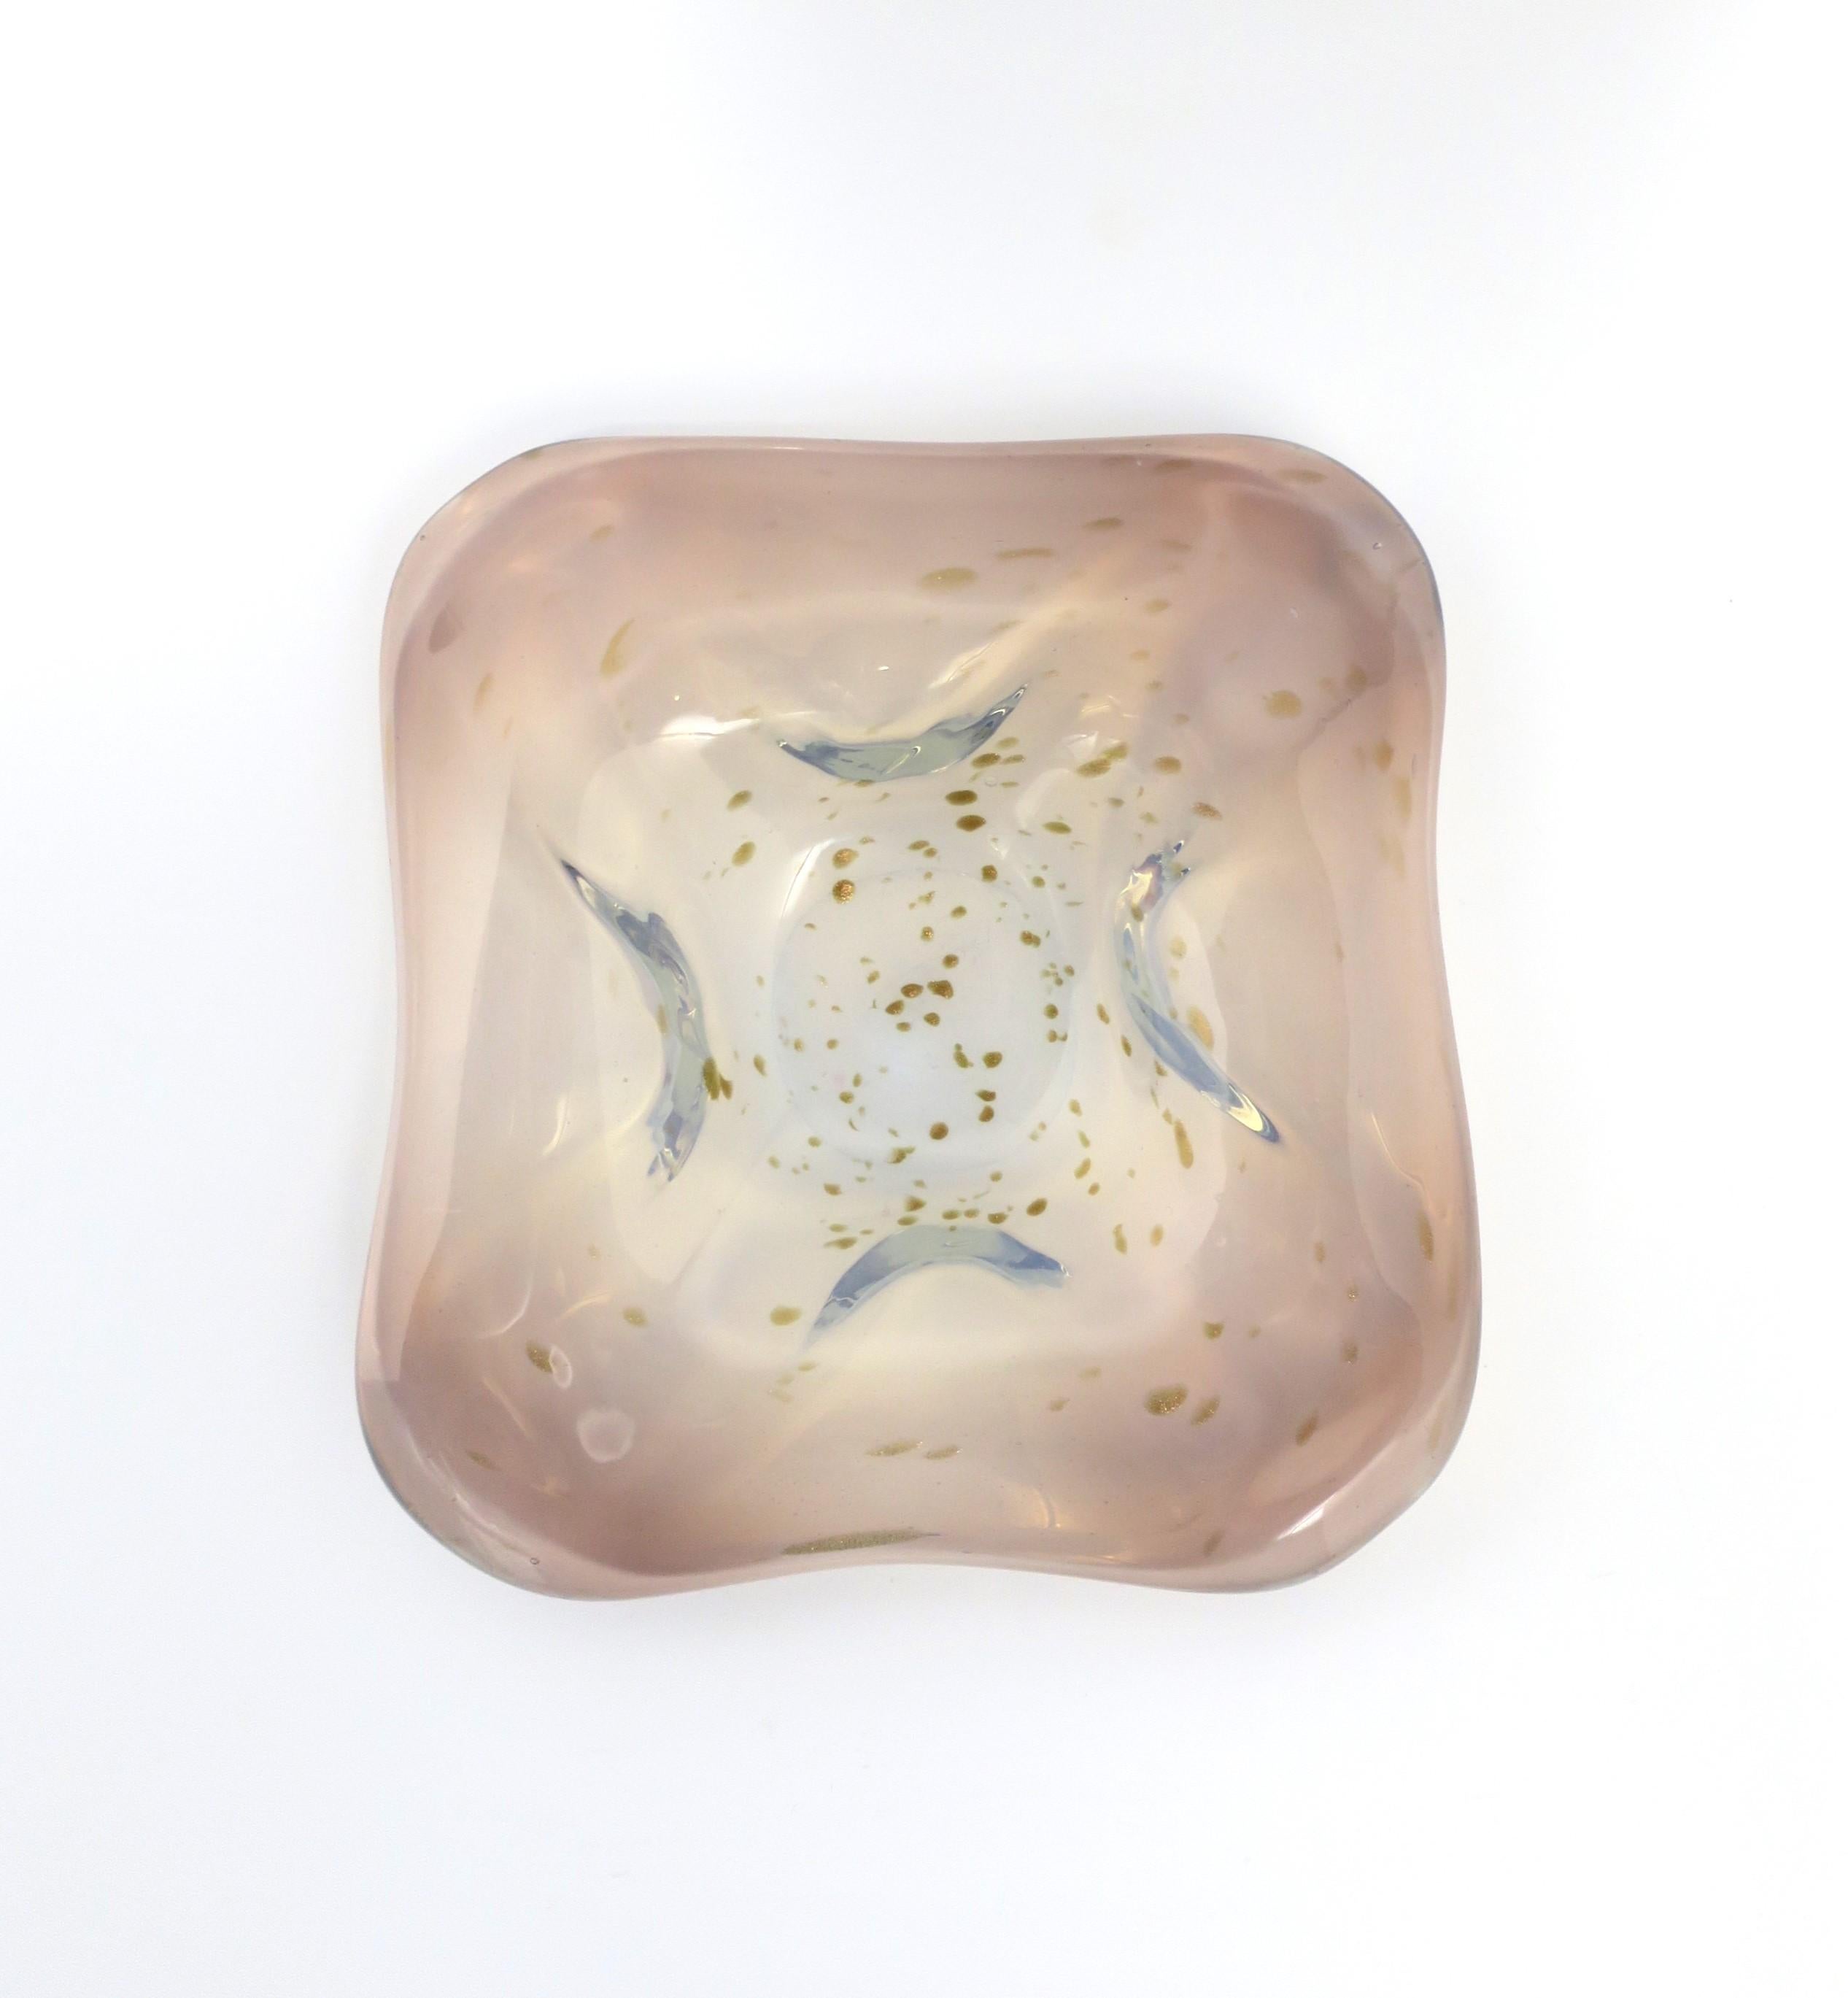 A beautiful and substantial Italian Murano art glass bowl of white opaline, pink, light blue hues and drops of shimmering gold, Midcentury Modern period, circa mid-20th century, Italy. Bowl has an organic modern form to it. Beautiful as a standalone